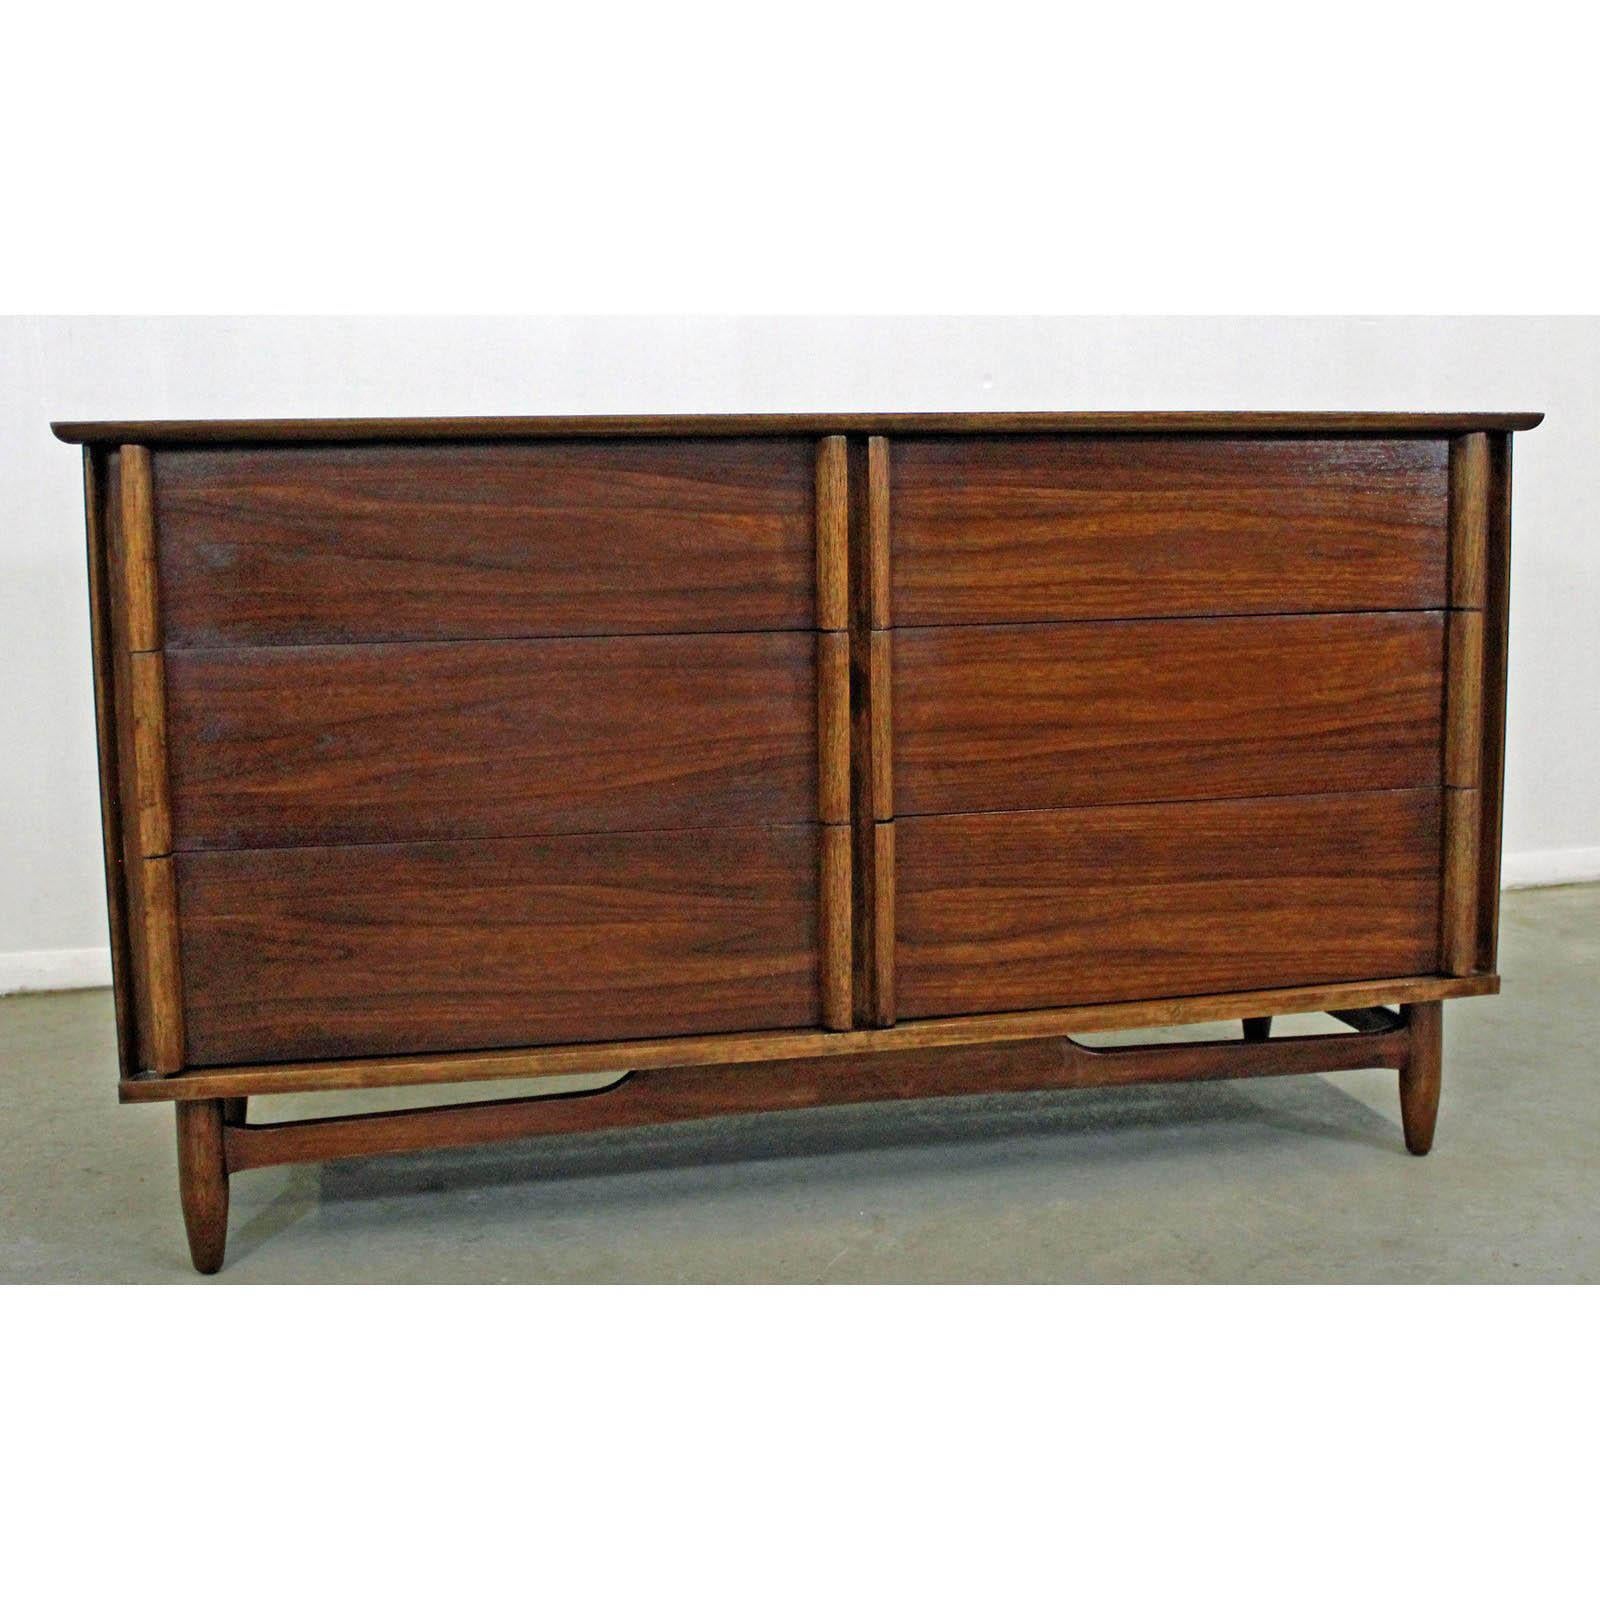 What a find. Offered is a gorgeous Mid-Century Modern walnut dresser with flared edges and six drawers (not dovetailed). The two top right drawers have dividers (see pics). It is in very good condition for its age, has been refinished, shows minor